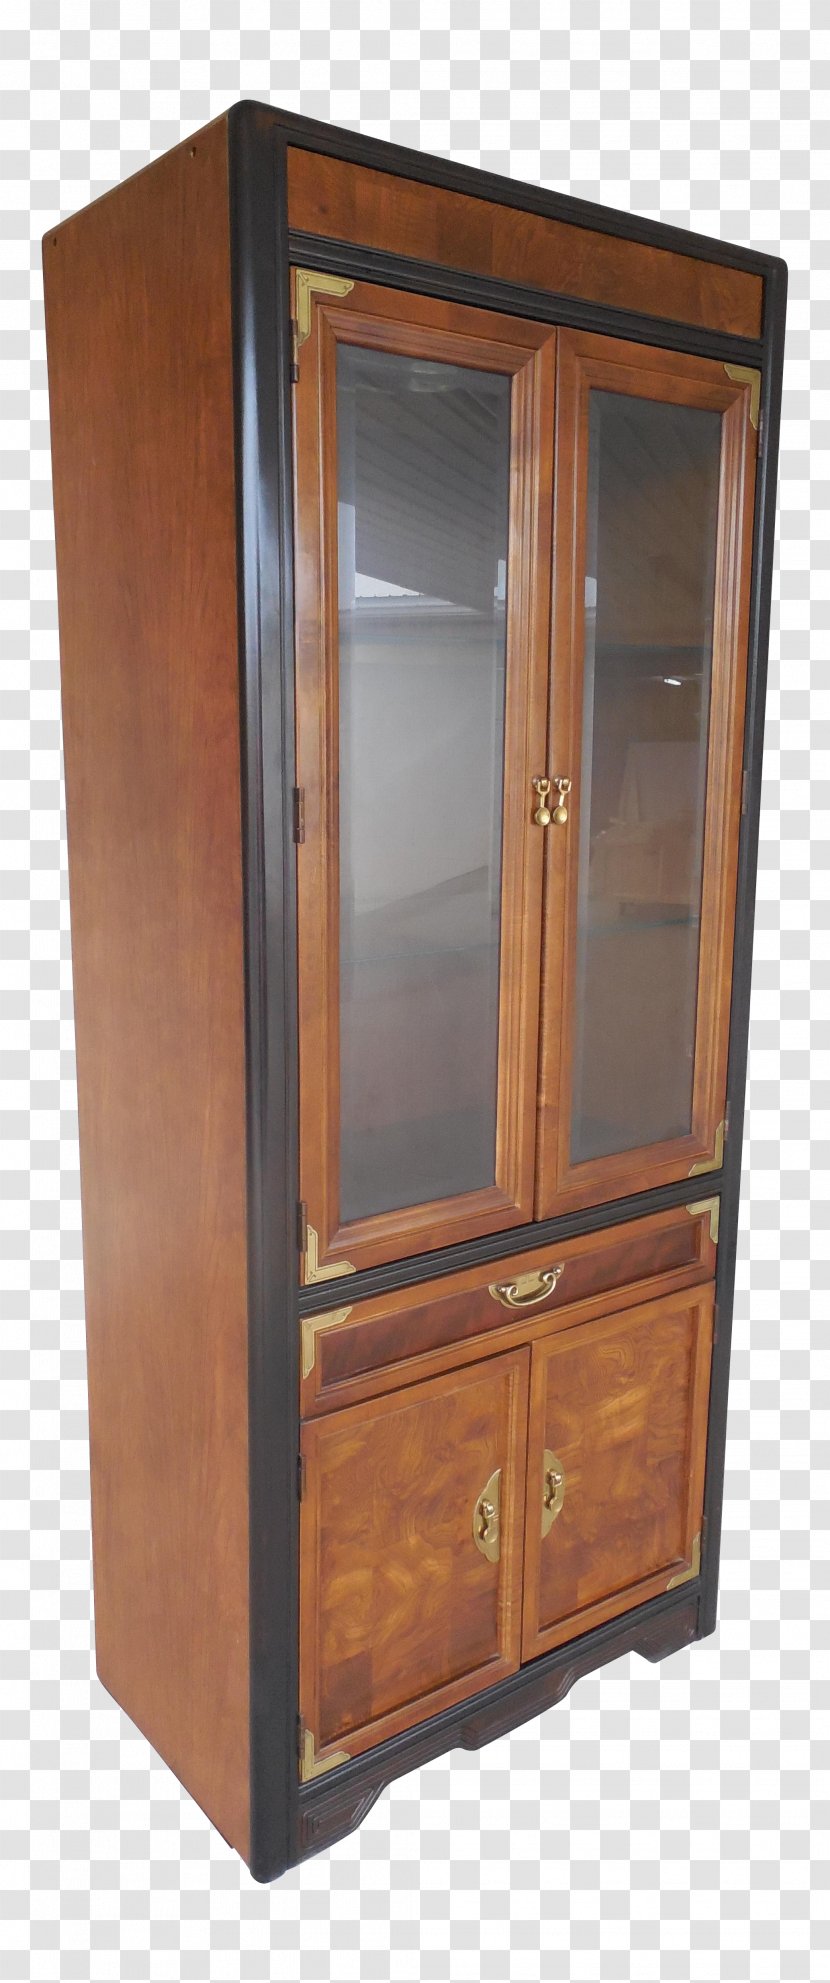 Cupboard Display Case Cabinetry Chairish Armoires & Wardrobes - Chiffonier Transparent PNG